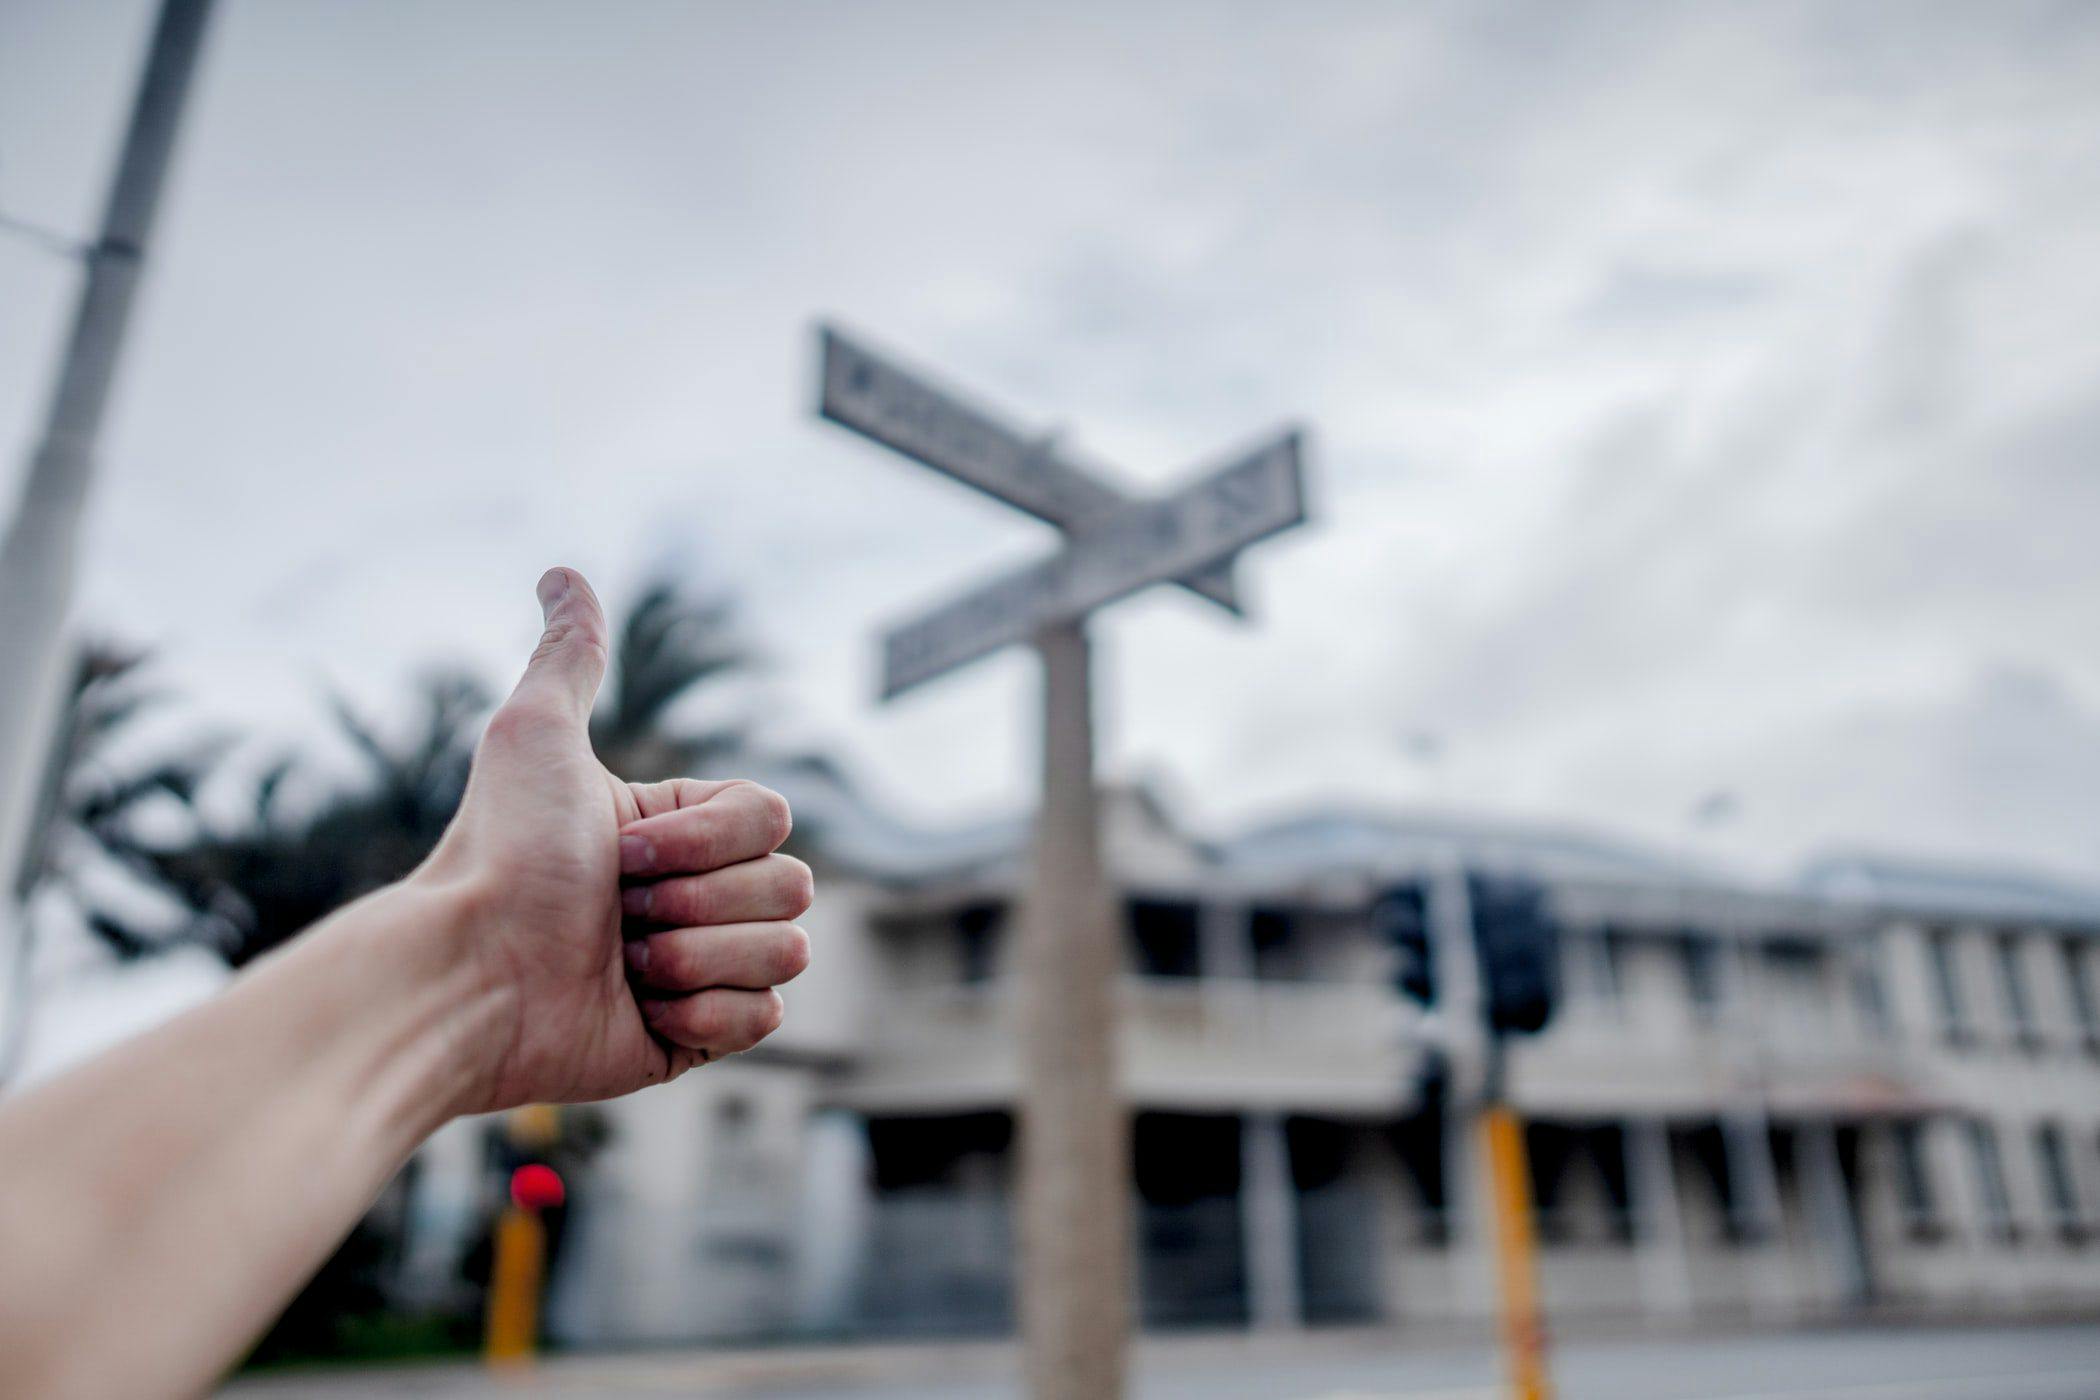 a hand giving a thumbs up in front of a street sign